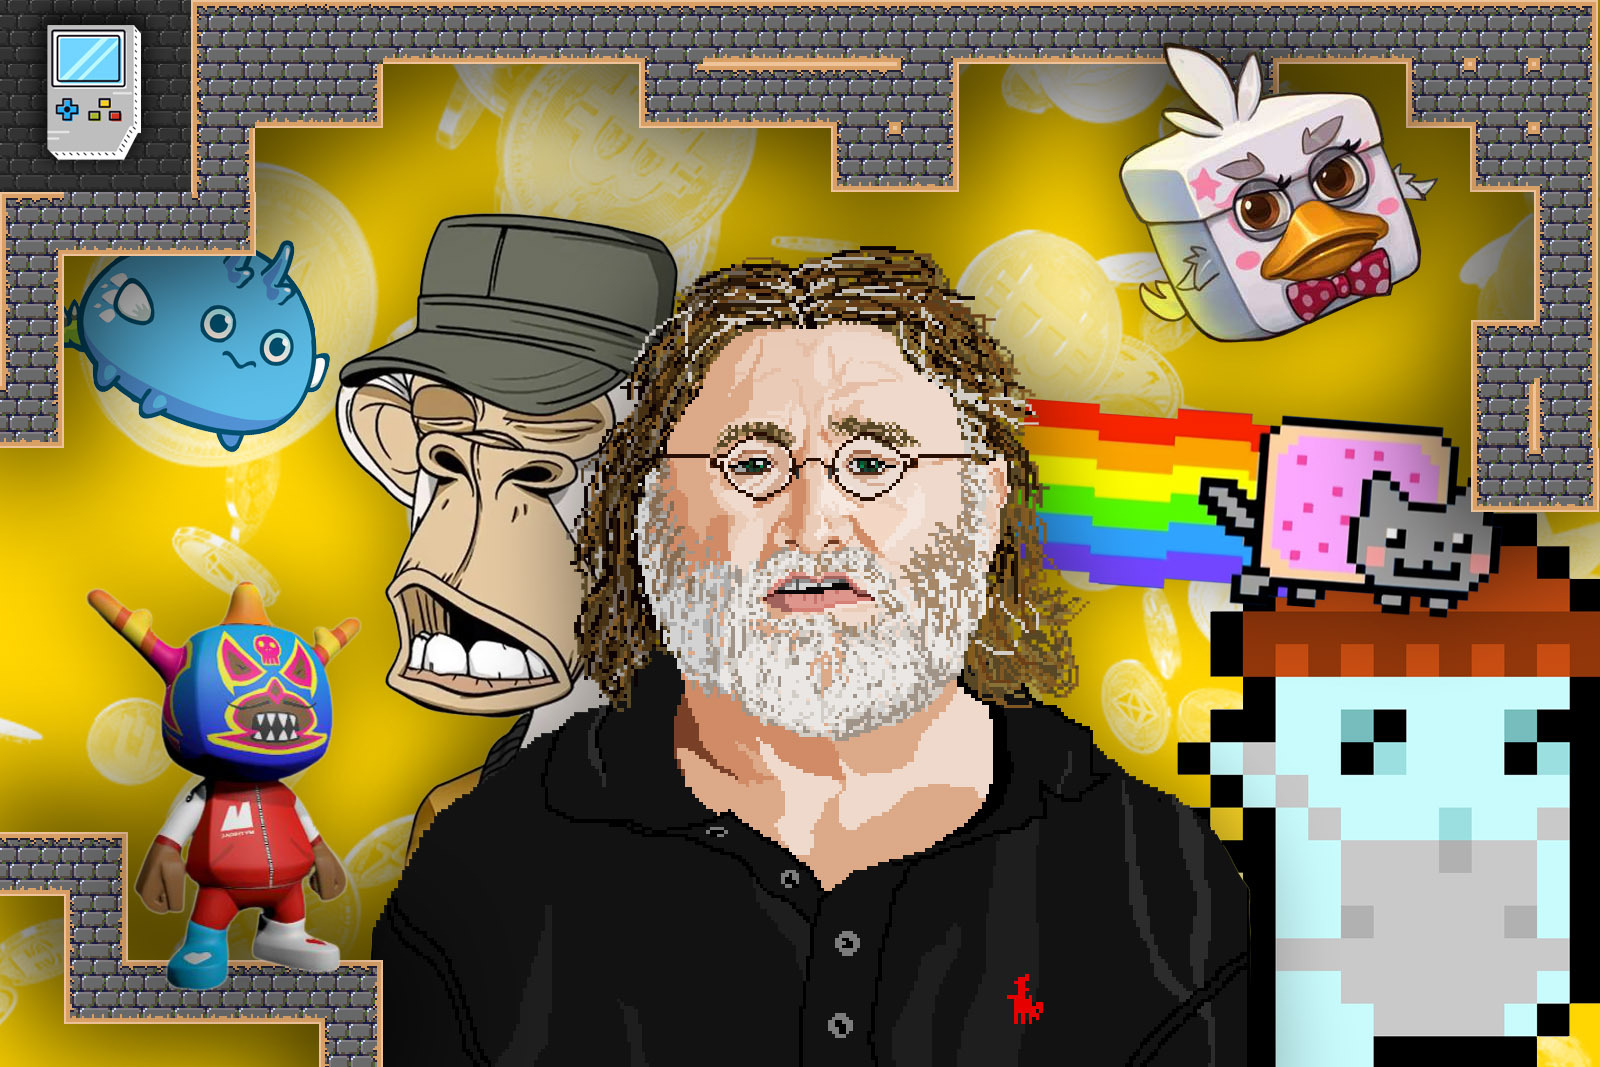 Gabe Newell, A Gaming Tycoon Like No Other: Half-Life Series Developer,  Steam Creator, and Sending A Gnome to Space?